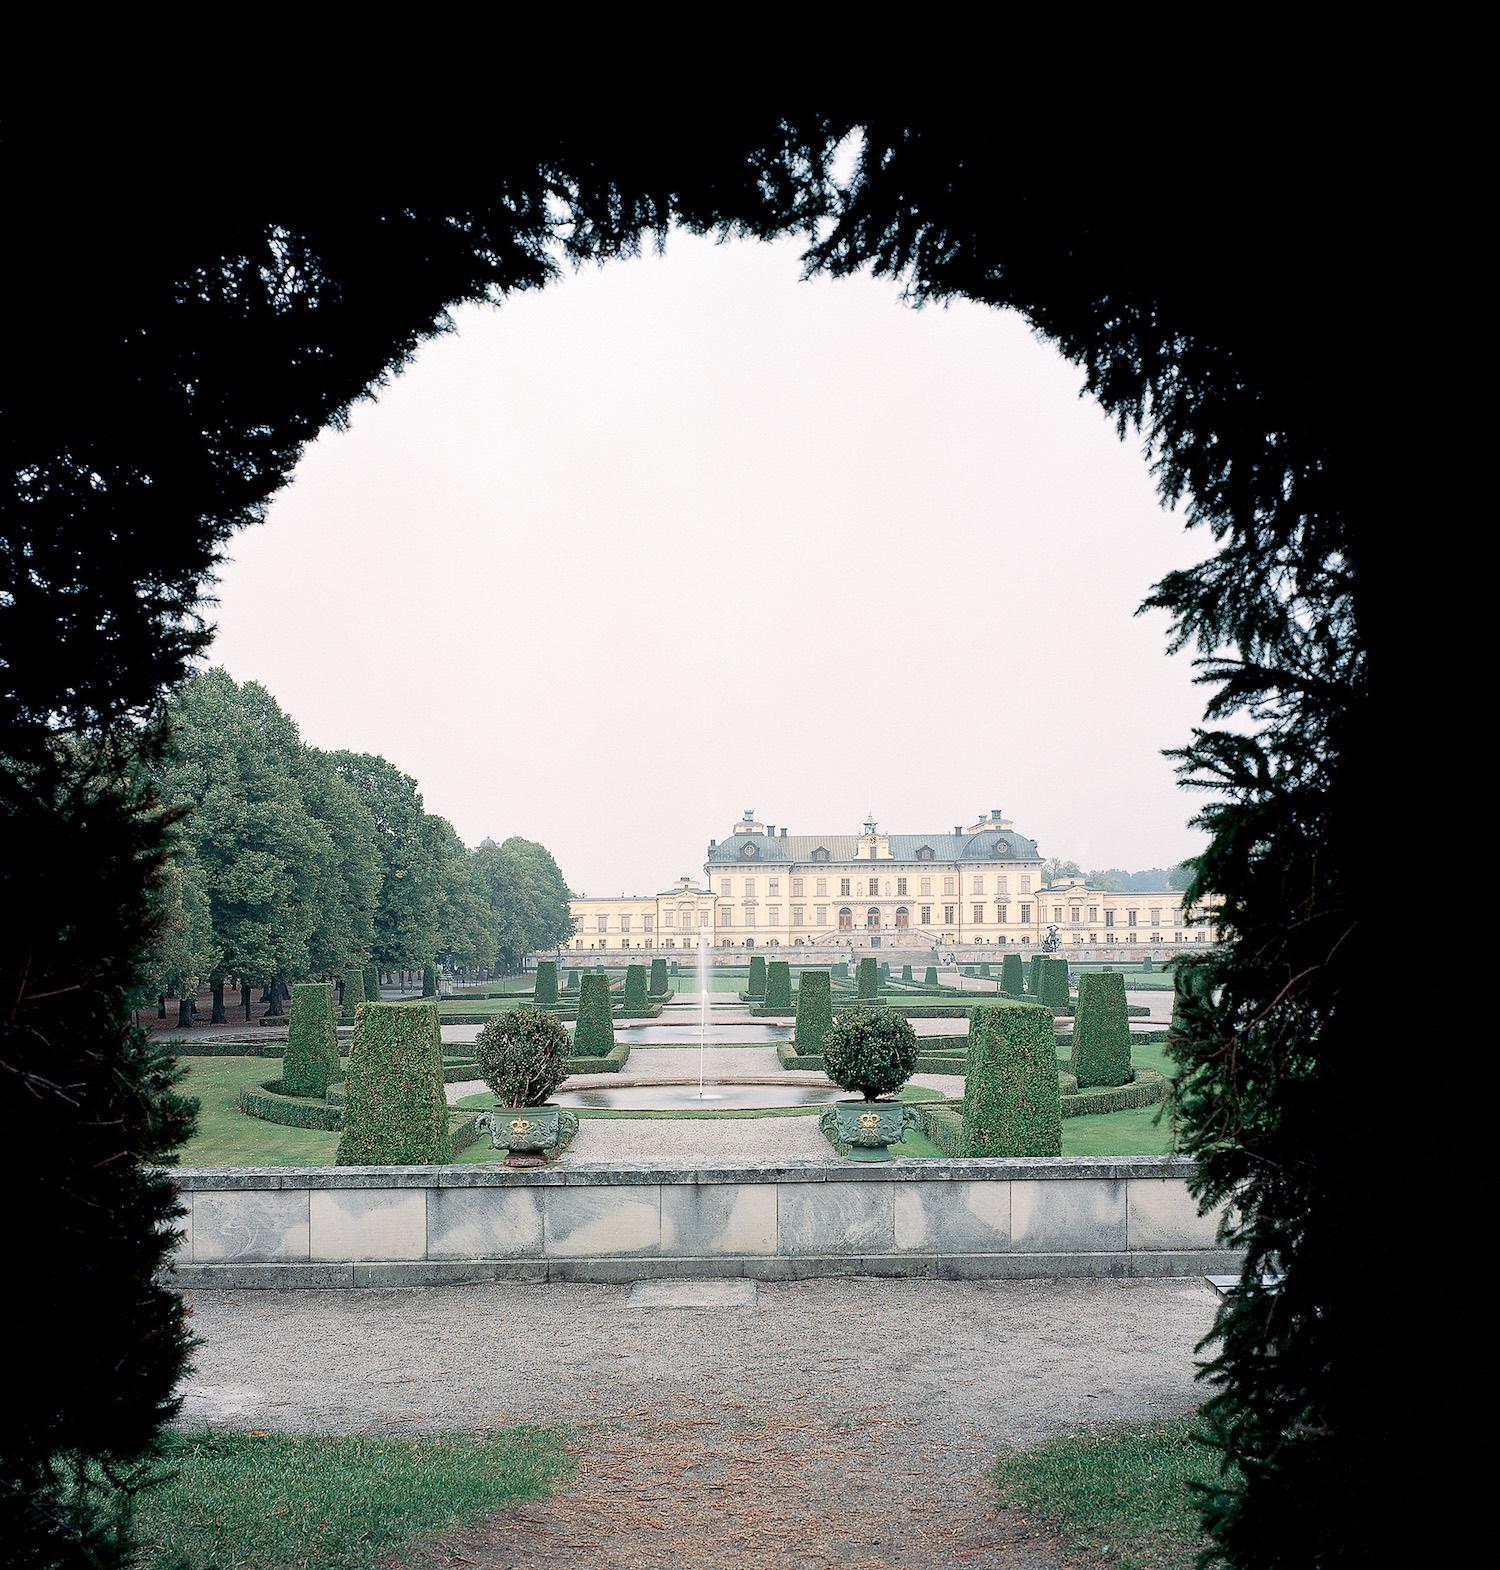 A view of the palace over the baroque garden from the labyrinth hedge. – © Åke Eson Lindman